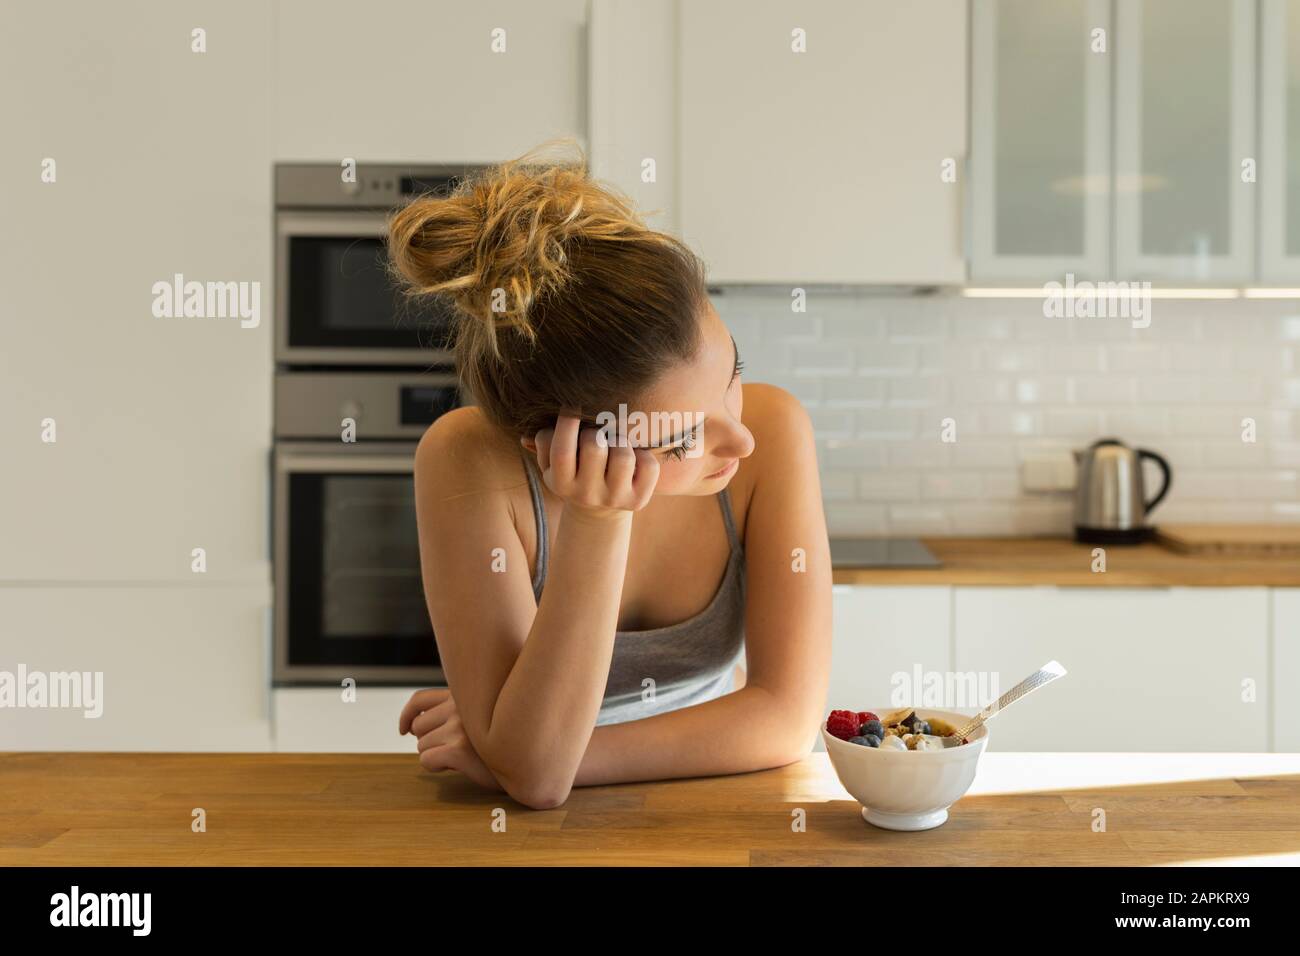 Female teenager during breakfast in the kitchen, looking sideways Stock Photo